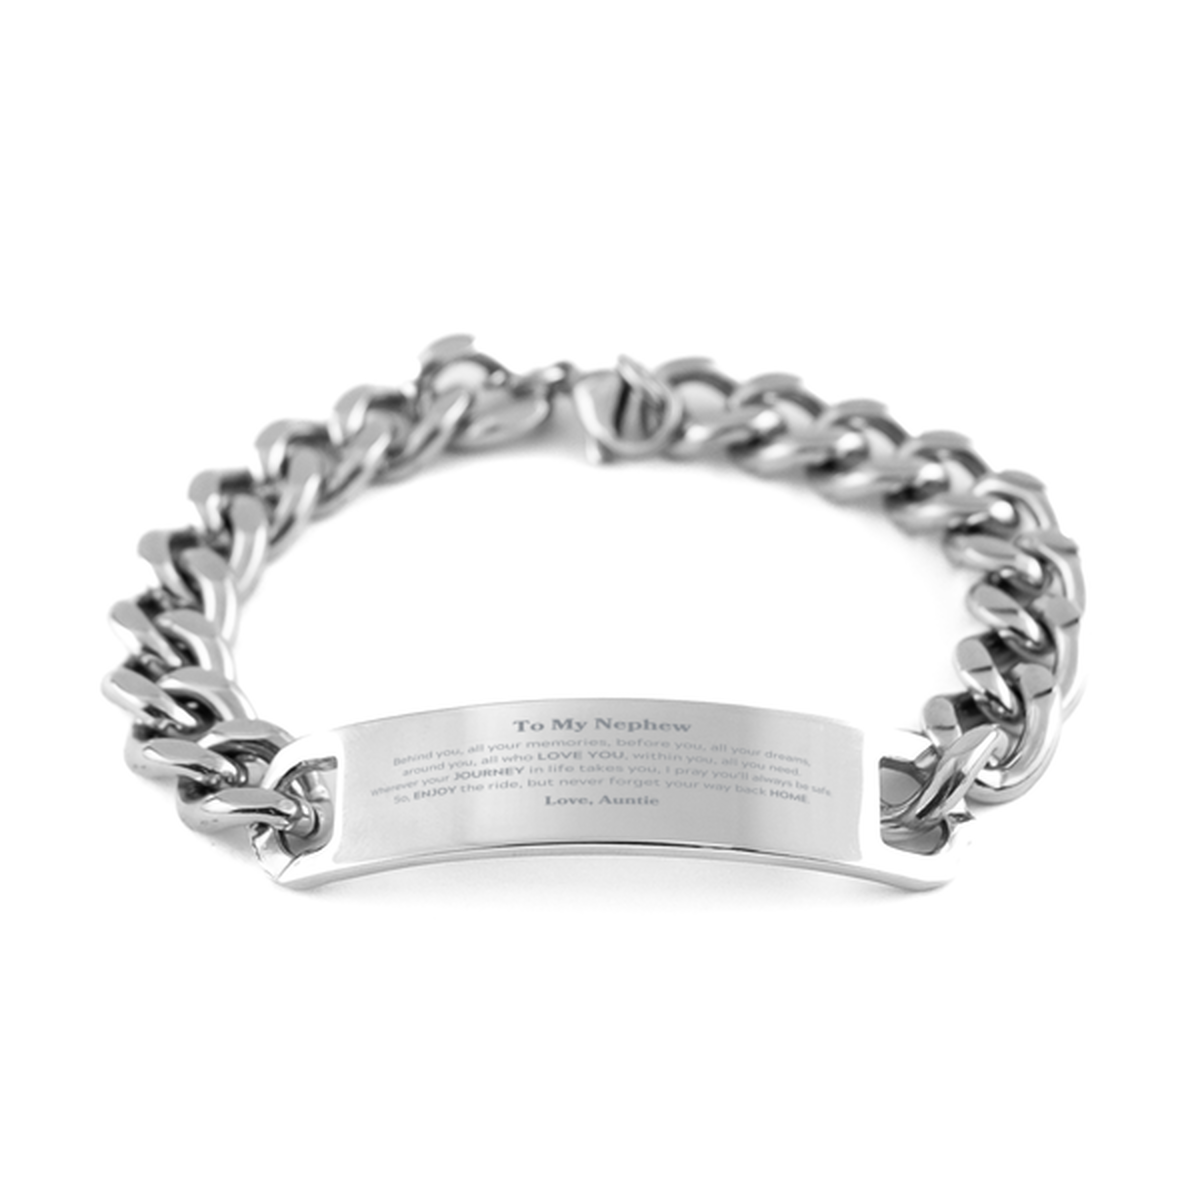 To My Nephew Graduation Gifts from Auntie, Nephew Cuban Chain Stainless Steel Bracelet Christmas Birthday Gifts for Nephew Behind you, all your memories, before you, all your dreams. Love, Auntie